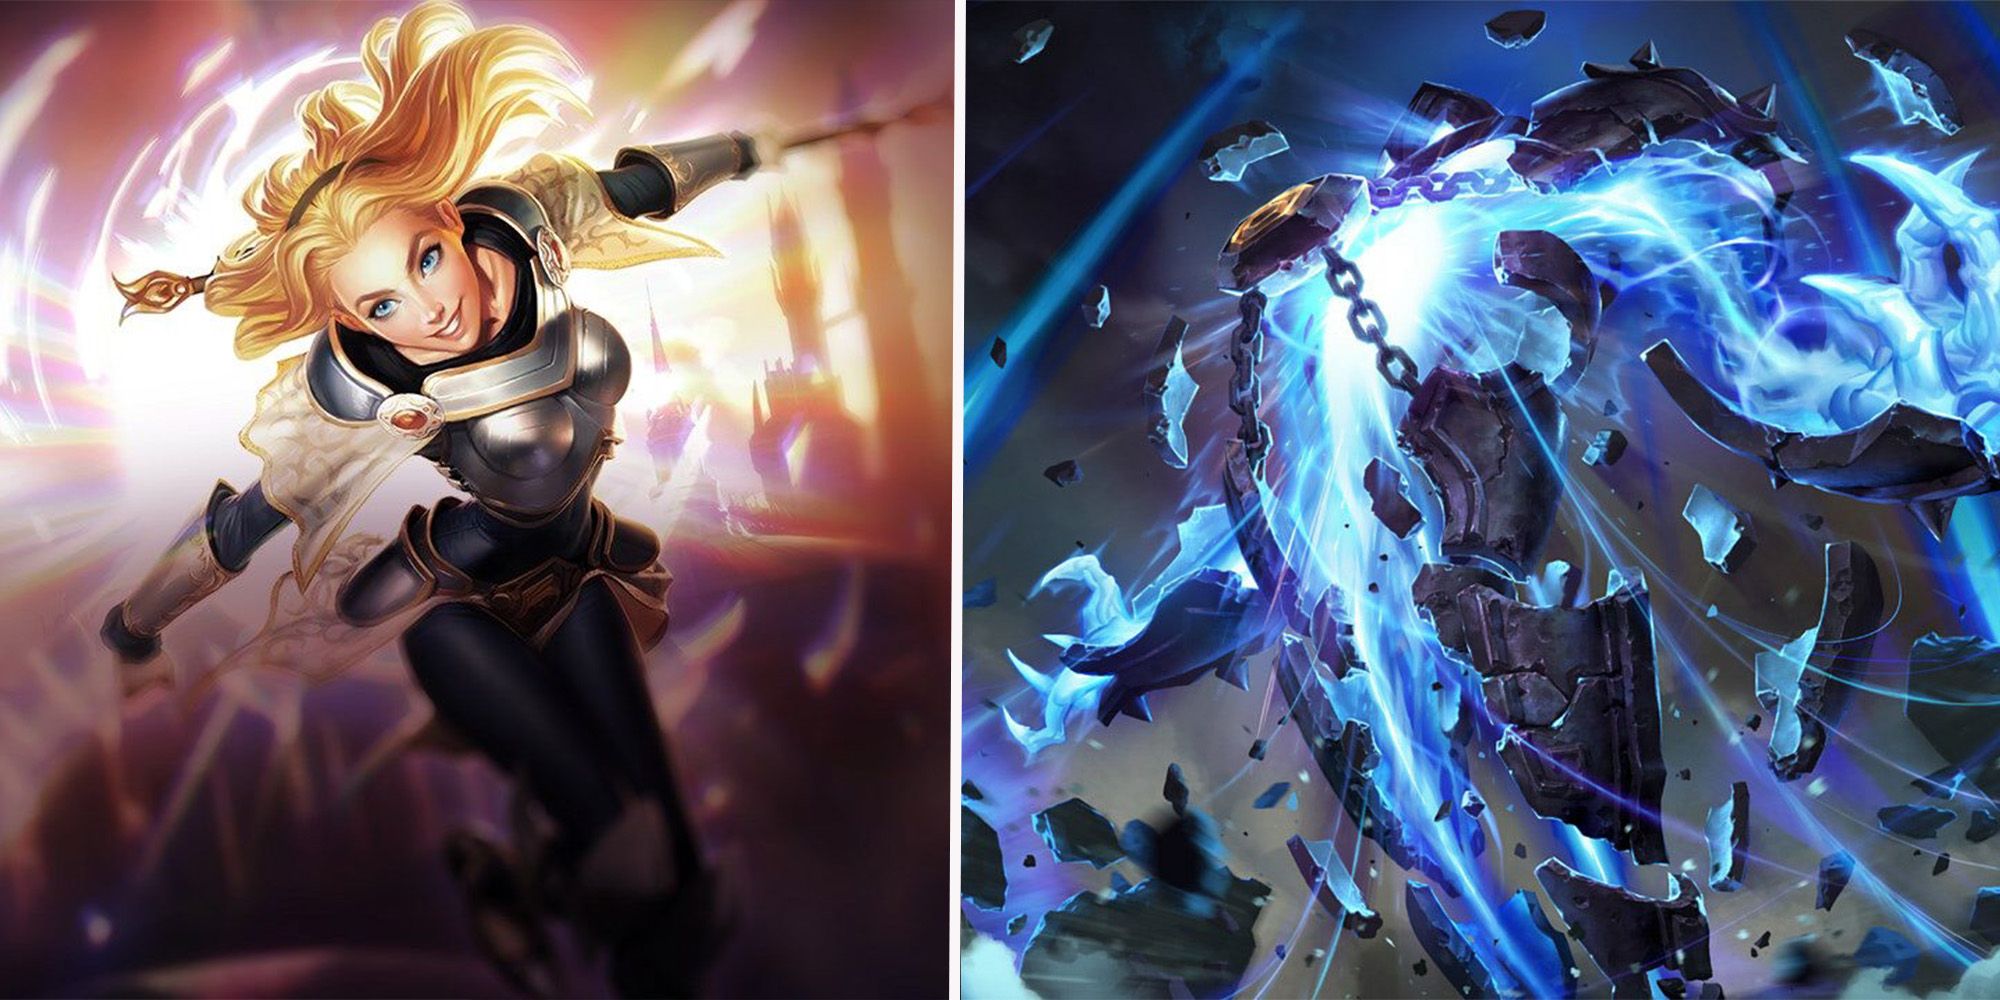 Lux and Xerath from League of Legends